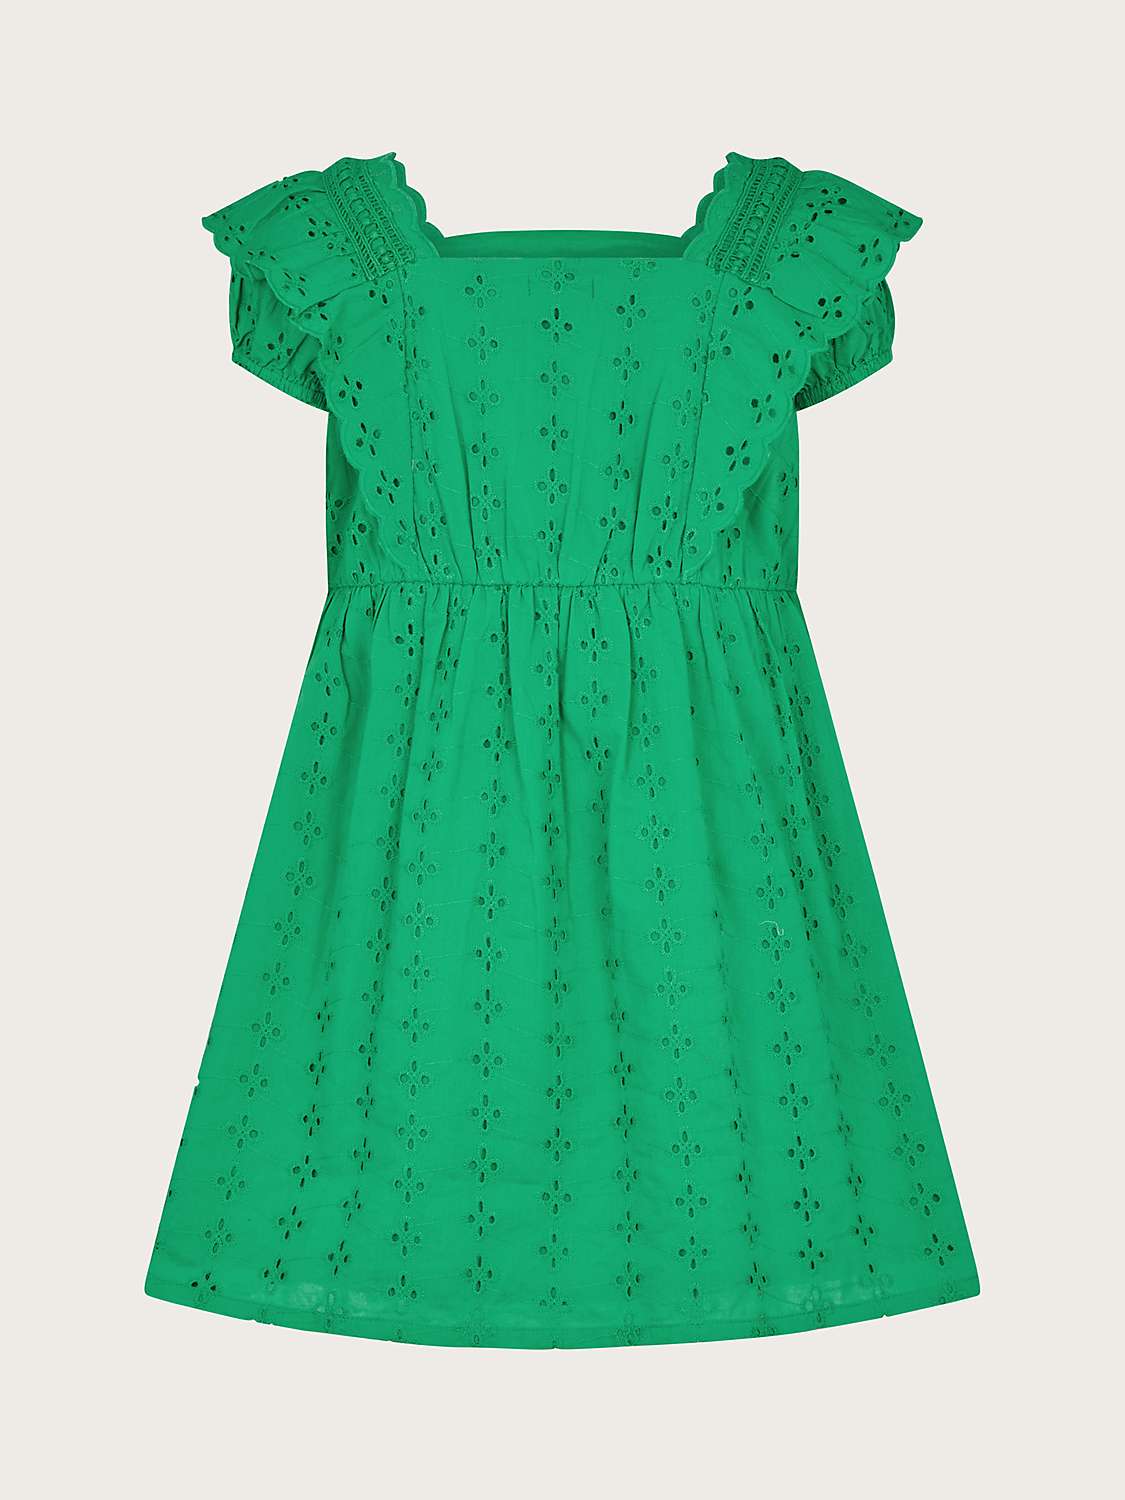 Buy Monsoon Kids' Broderie Anglaise Frill Dress, Green Online at johnlewis.com